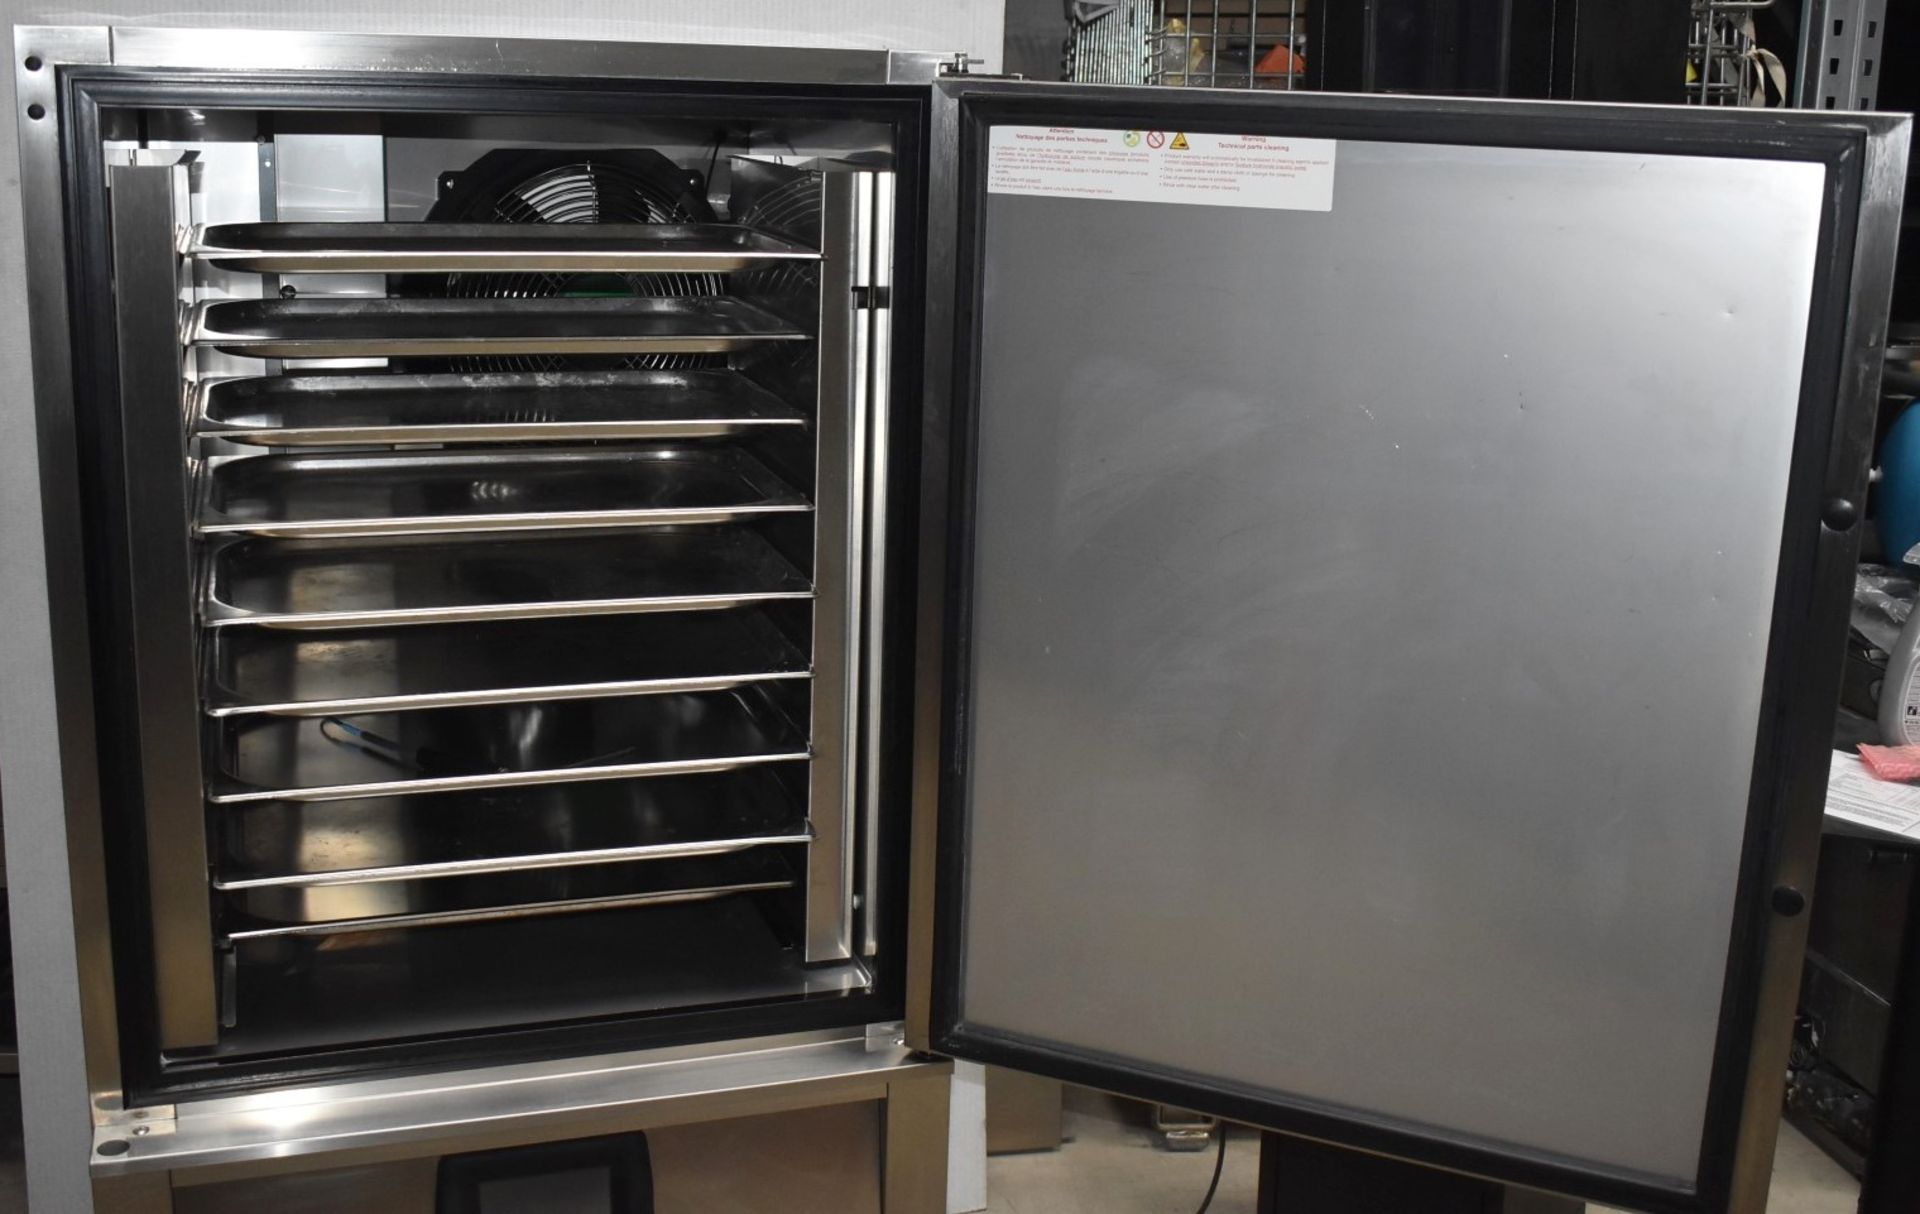 1 x Foster BFT38 Blast Freezer - 2019 Model - Includes Full Set of Internal Trays - RRP £8,322 - - Image 8 of 18